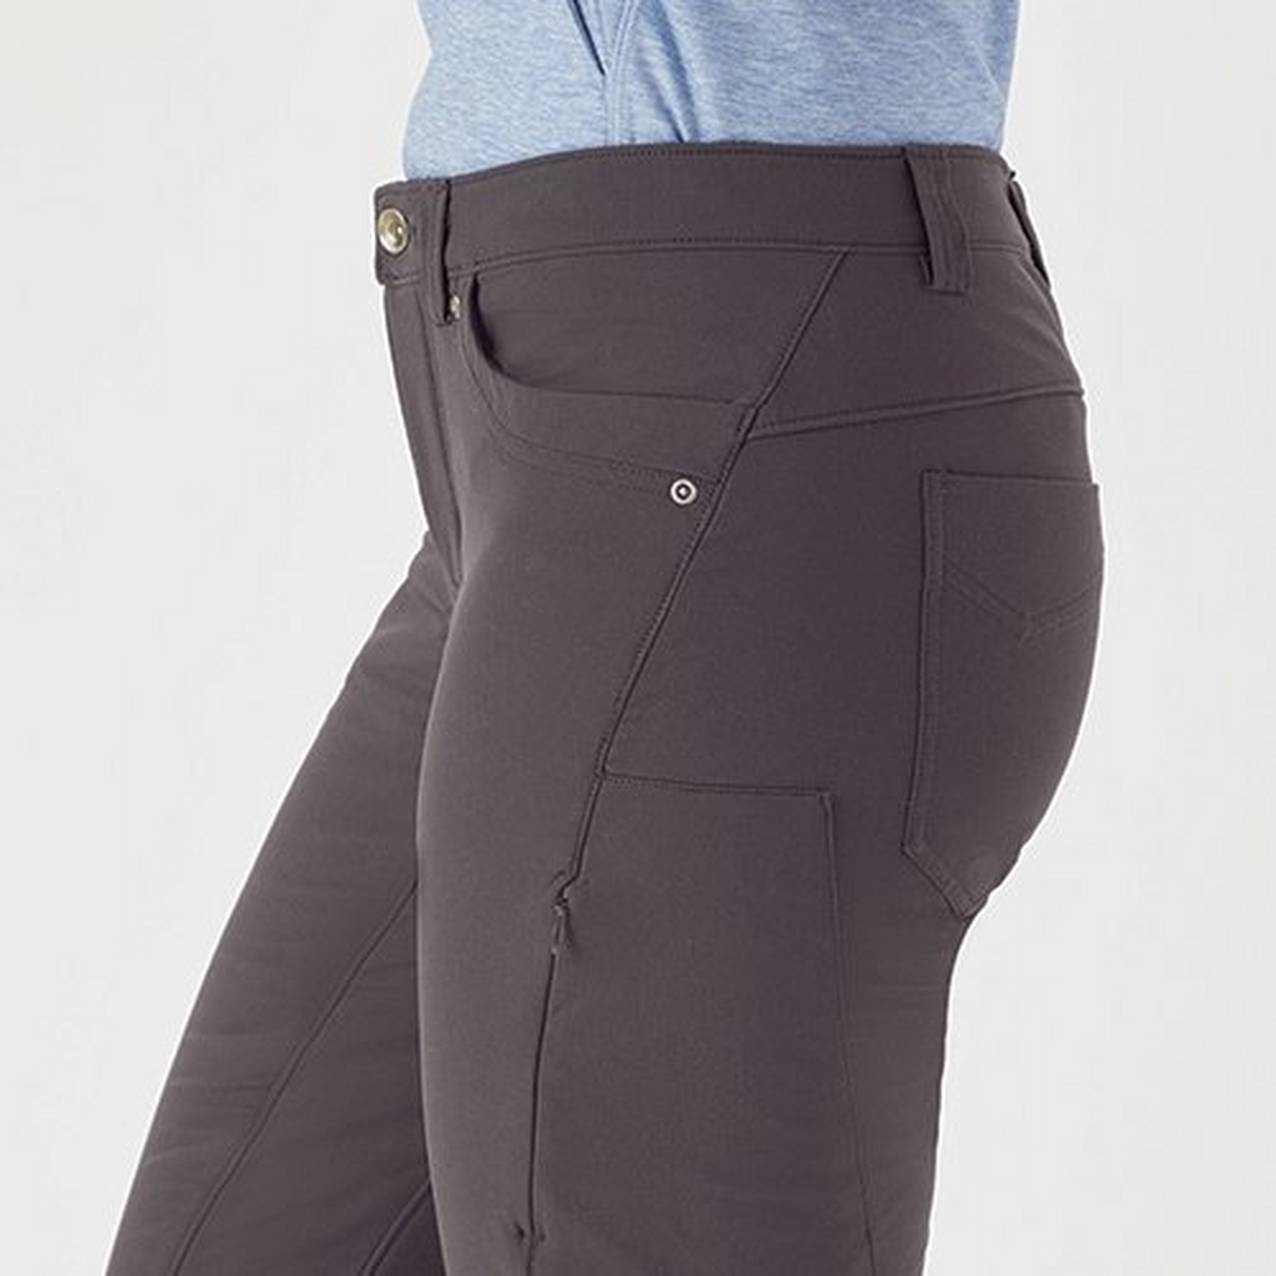 Close up of the side of pants revealing a zippered mid-hip pocket 